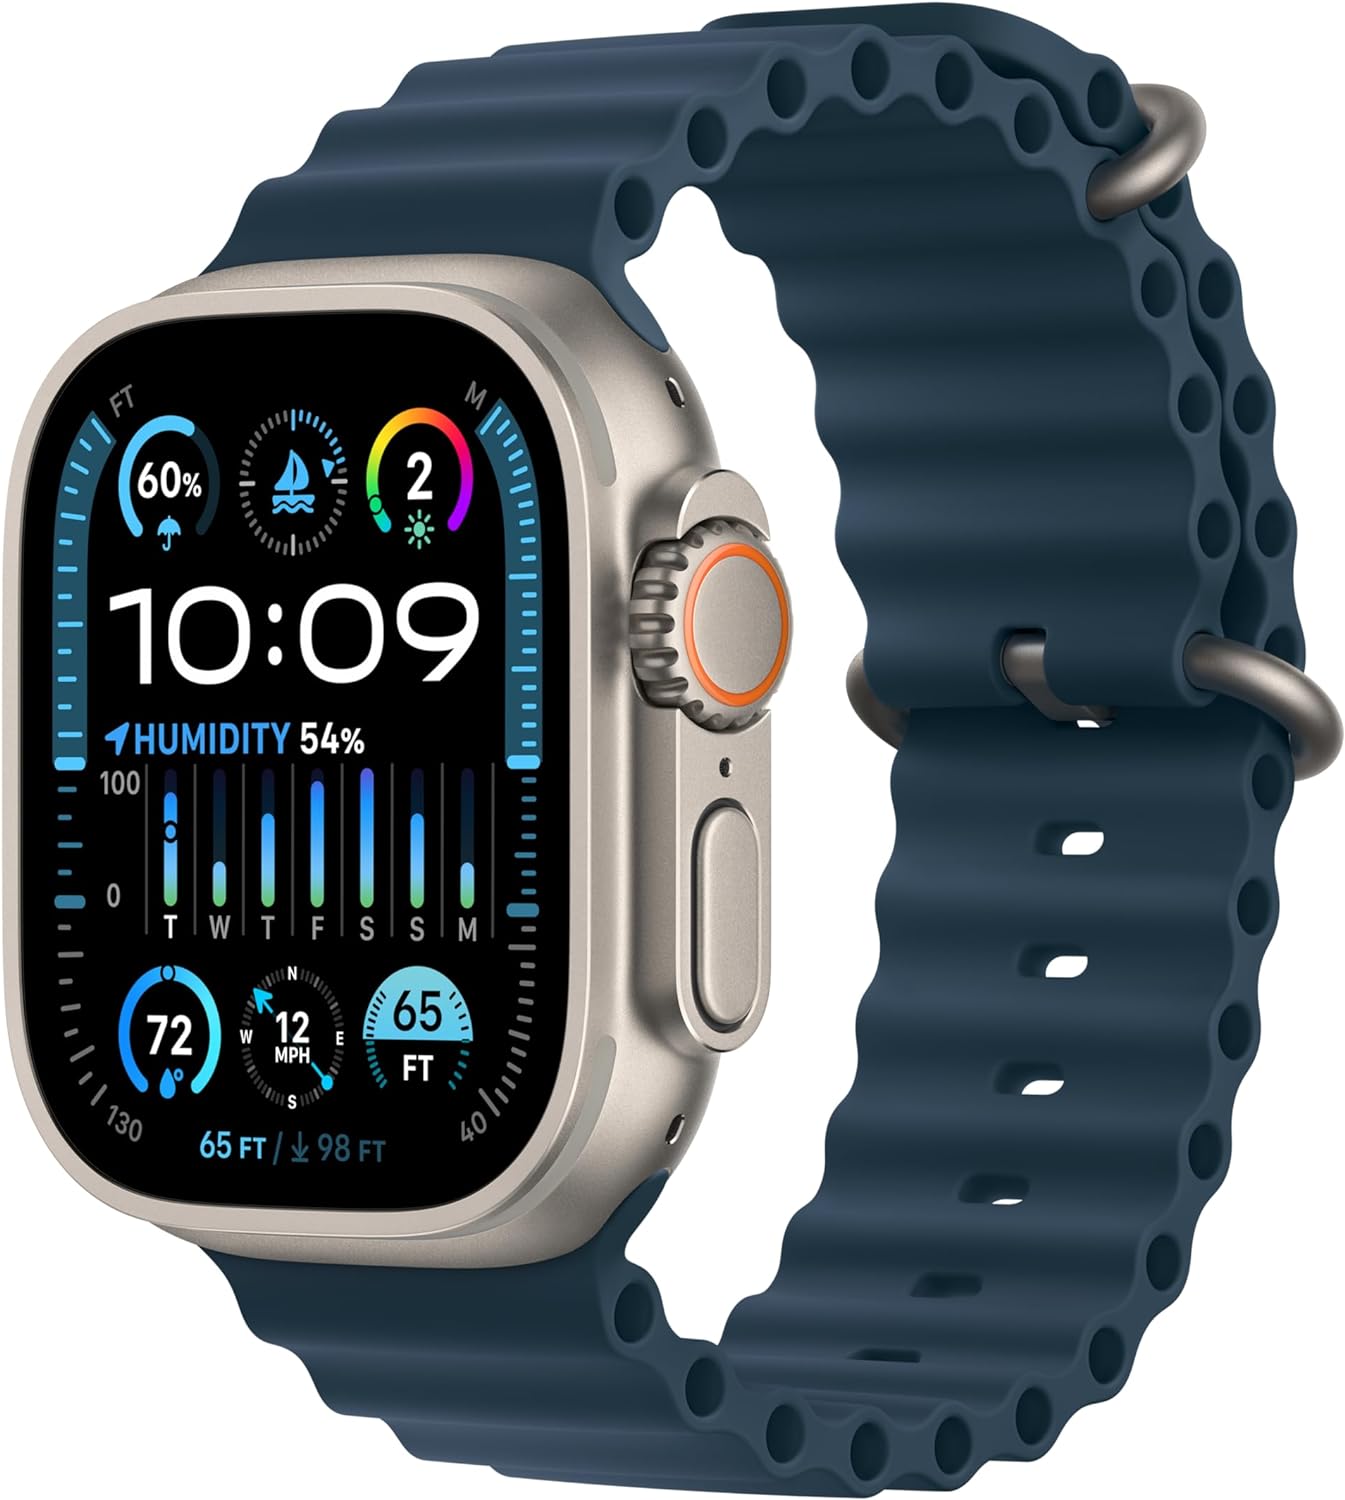 The Best Smartwatch with Cellular and GPS Connectivity - Rugged Titanium Body - Waterproof Smartwatch - Long Lasting Battery with Bright Display